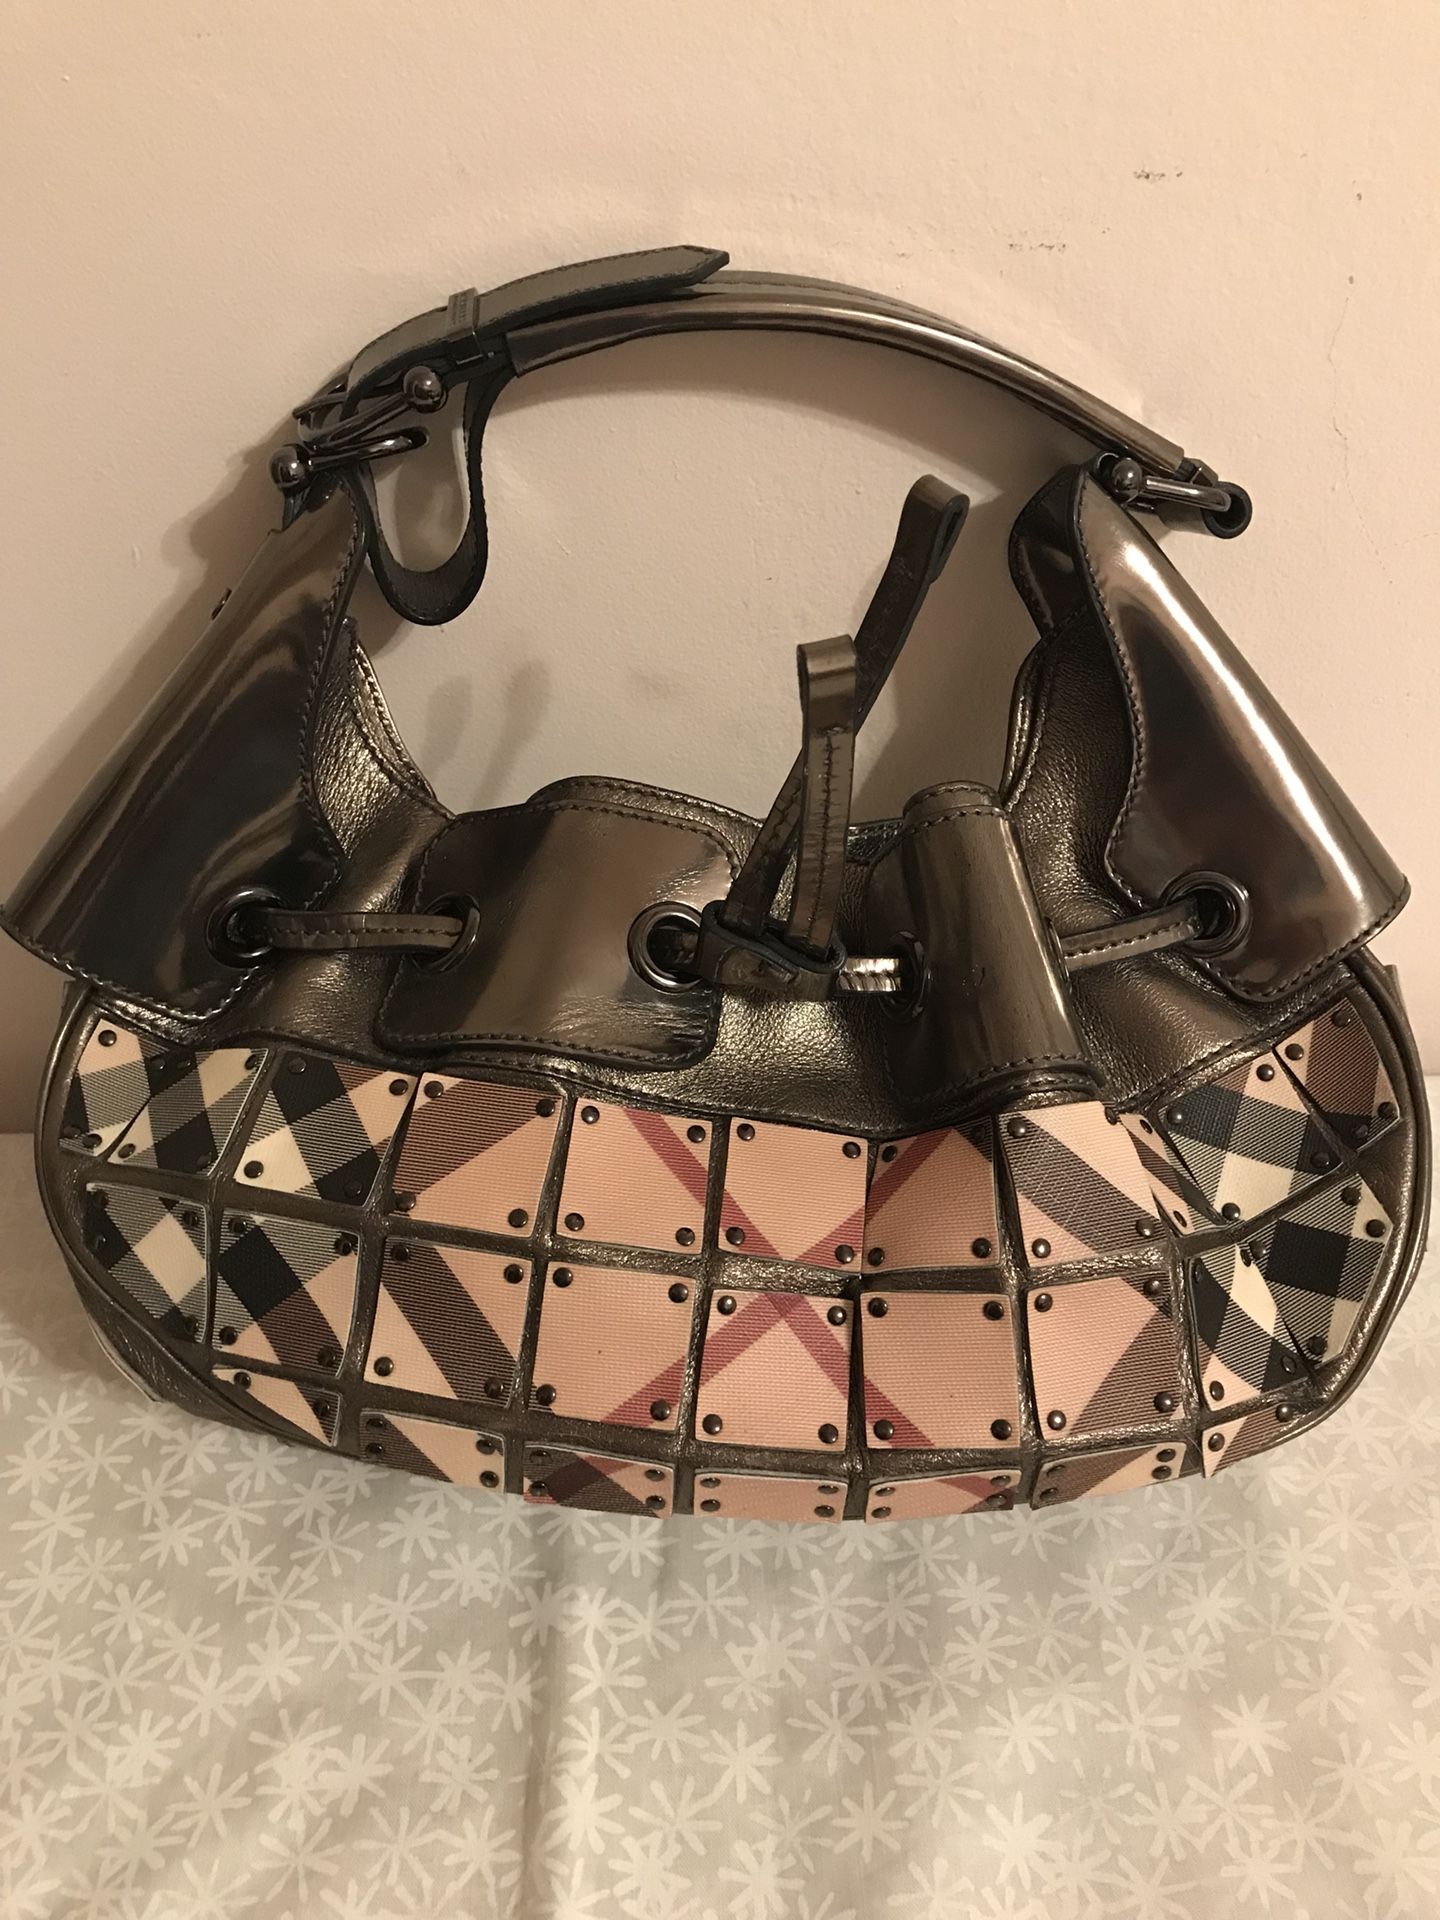 Burberry Beaton Sliced Nova Chexk Silver Large Bag. Condition is Pre-owne